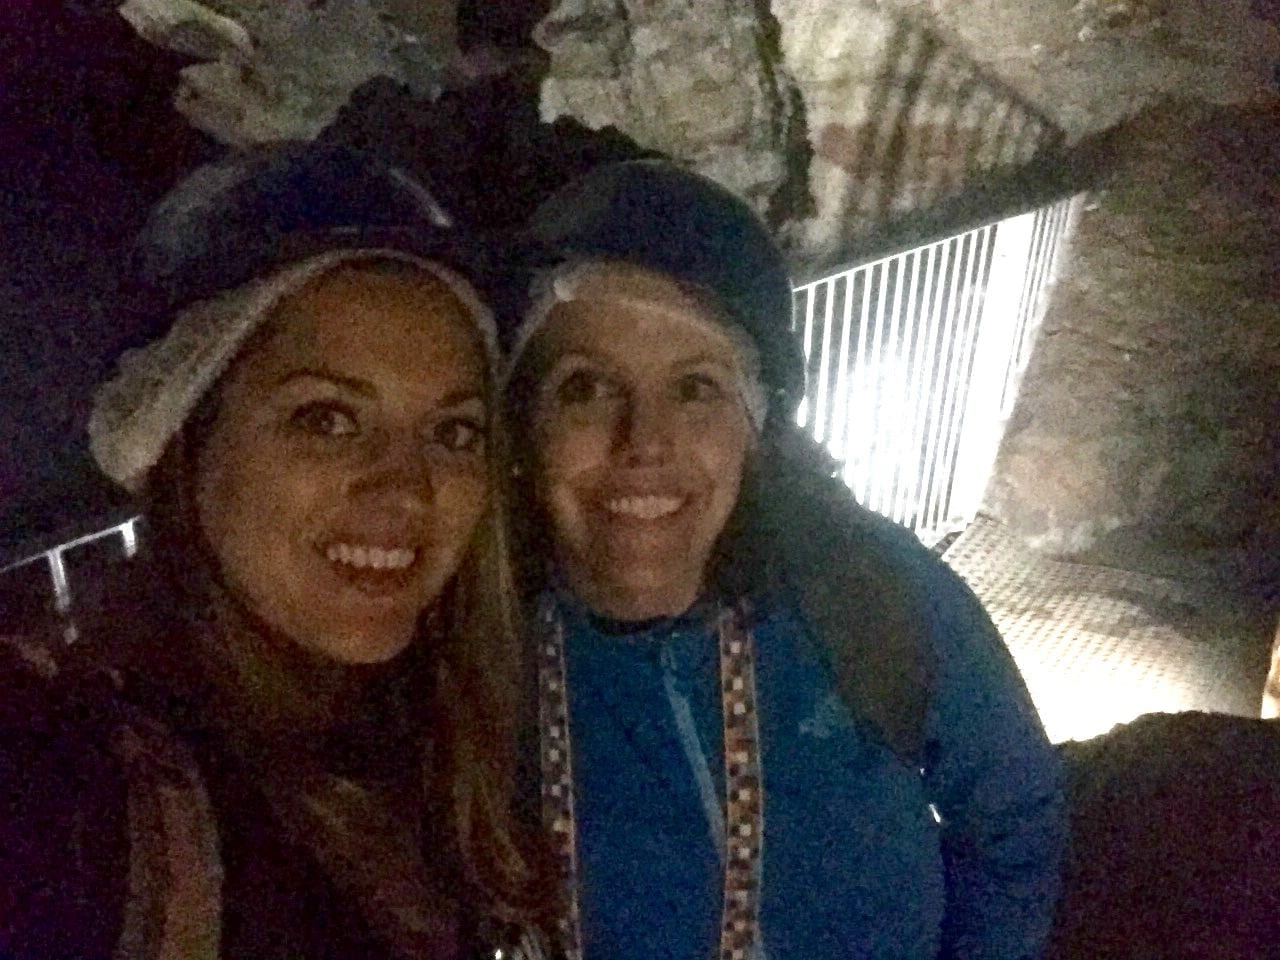 Kate and Beth at the Sterkfontein Caves